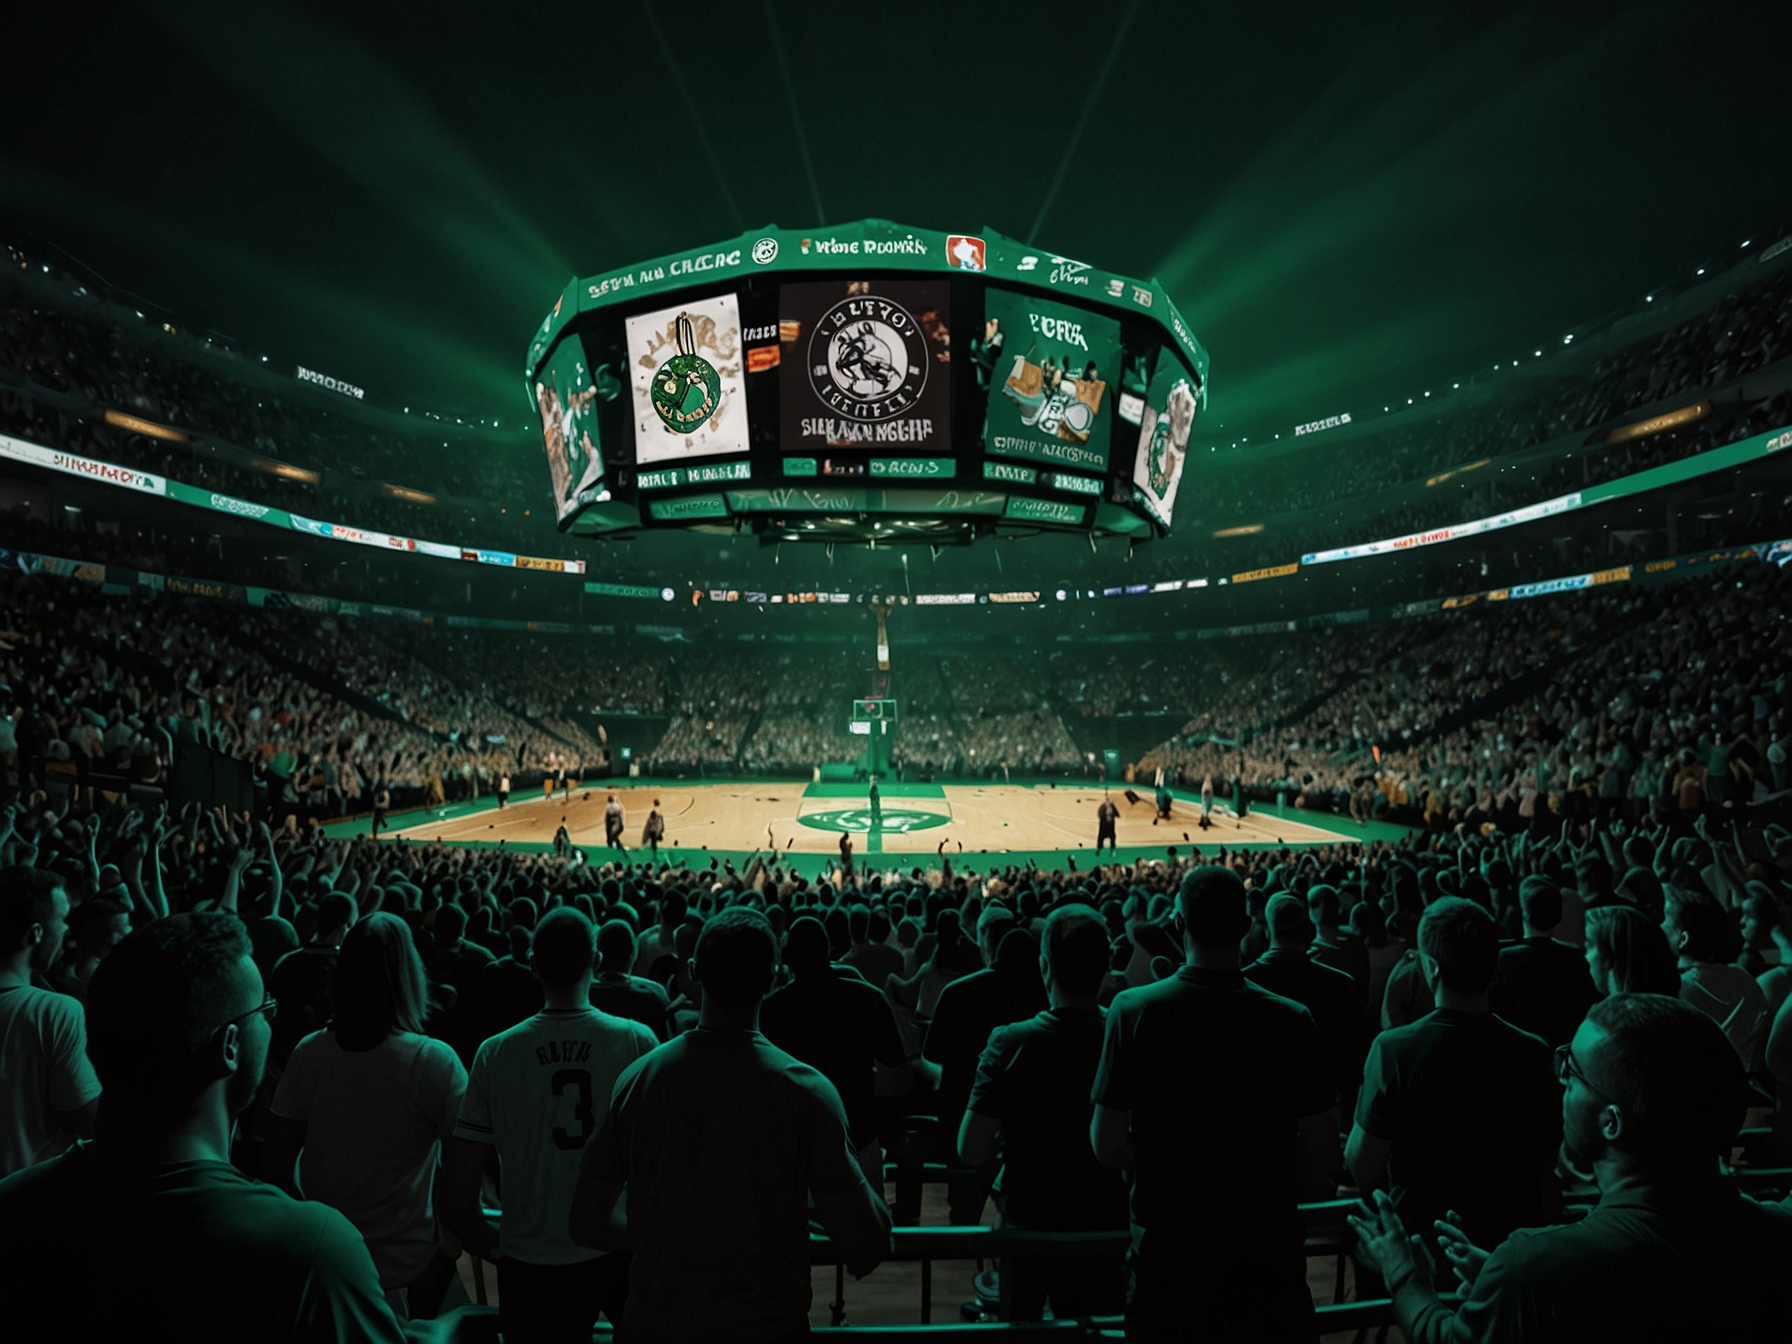 Fans packed into TD Garden, creating an electric atmosphere as the Boston Celtics aim to clinch their 18th NBA Championship in front of a roaring home crowd.